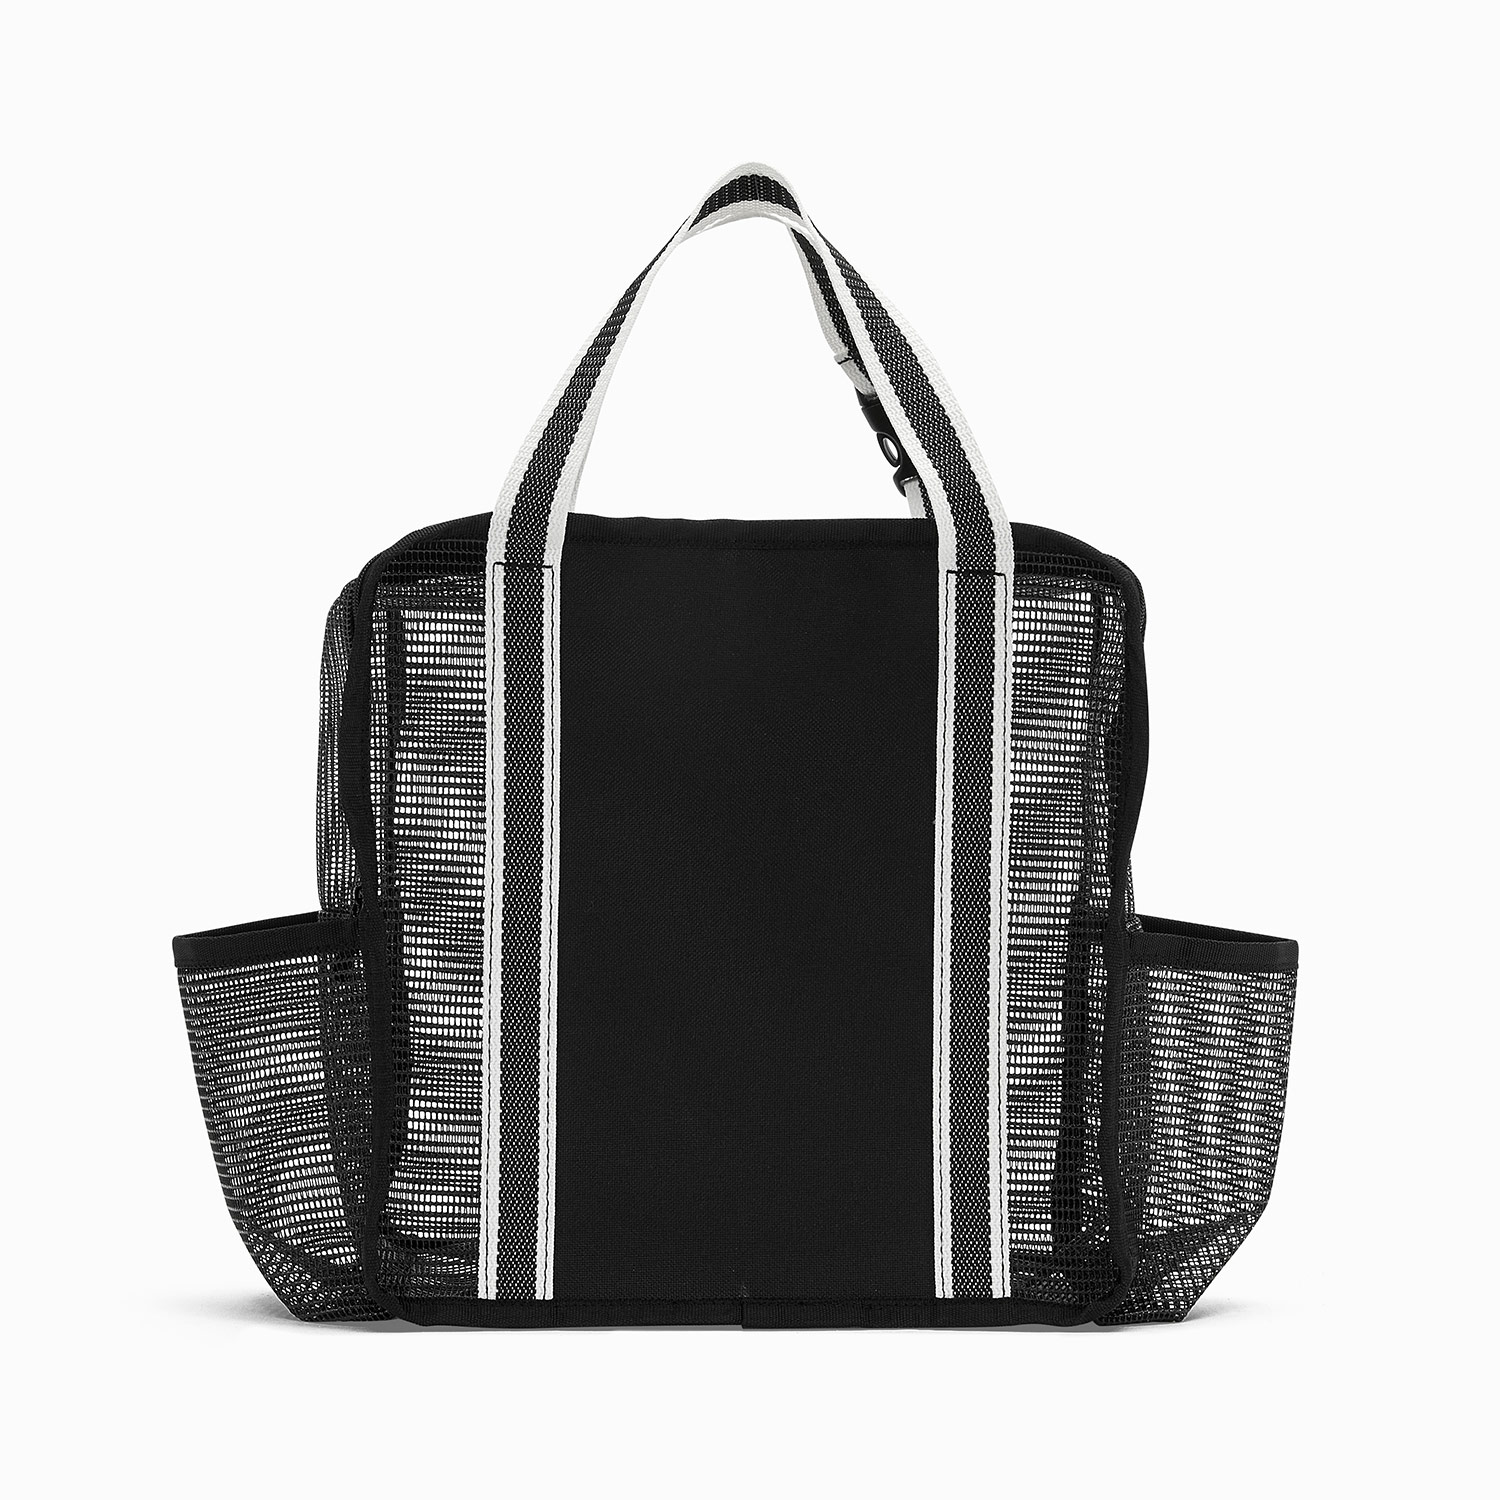 Black - Mesh Caddy - Thirty-One Gifts - Affordable Purses, Totes & Bags